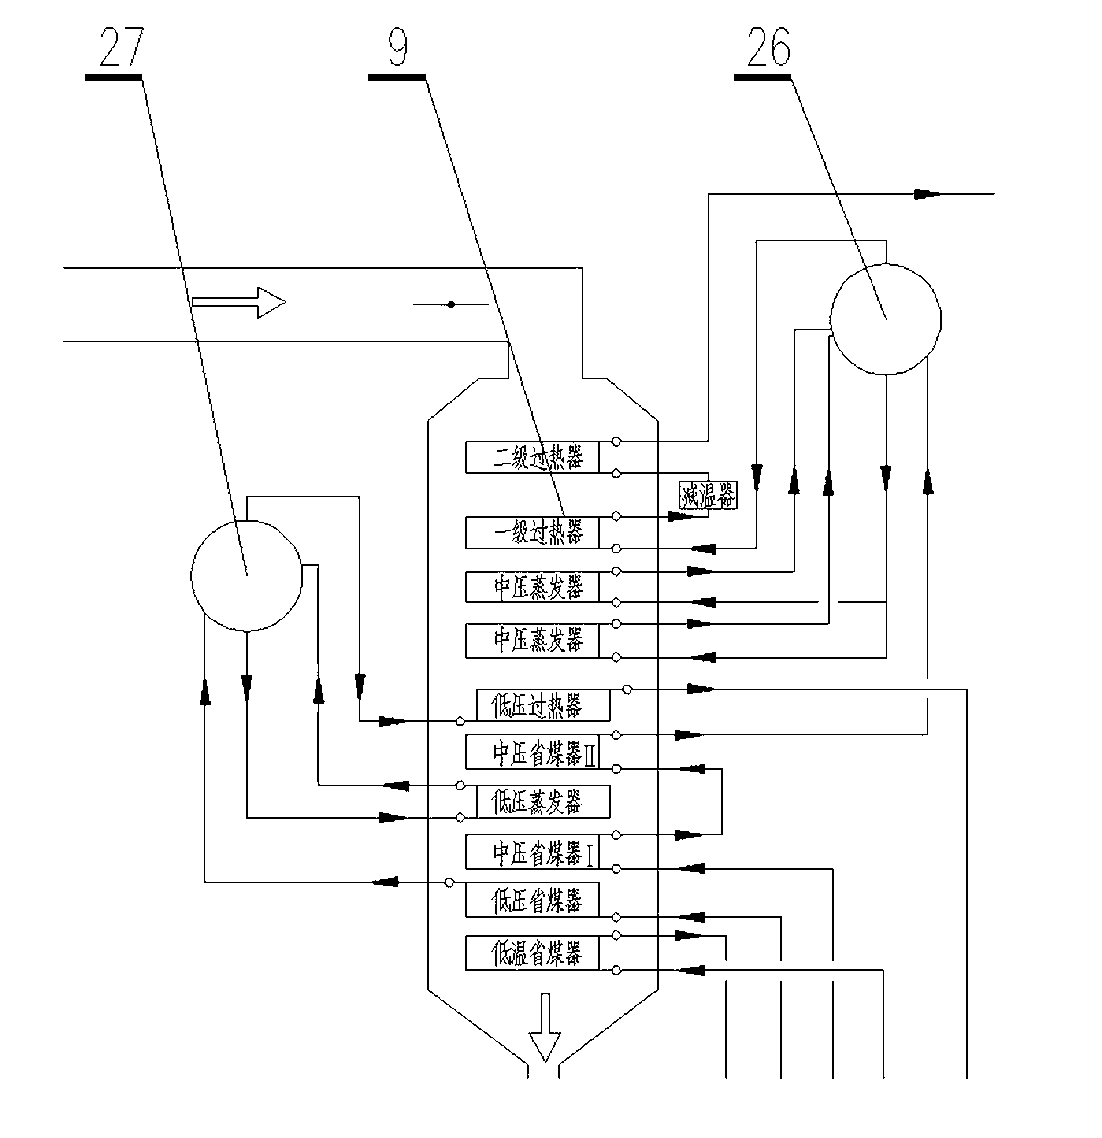 Device with griddle and process for generating power by efficiently recycling sinter waste heat